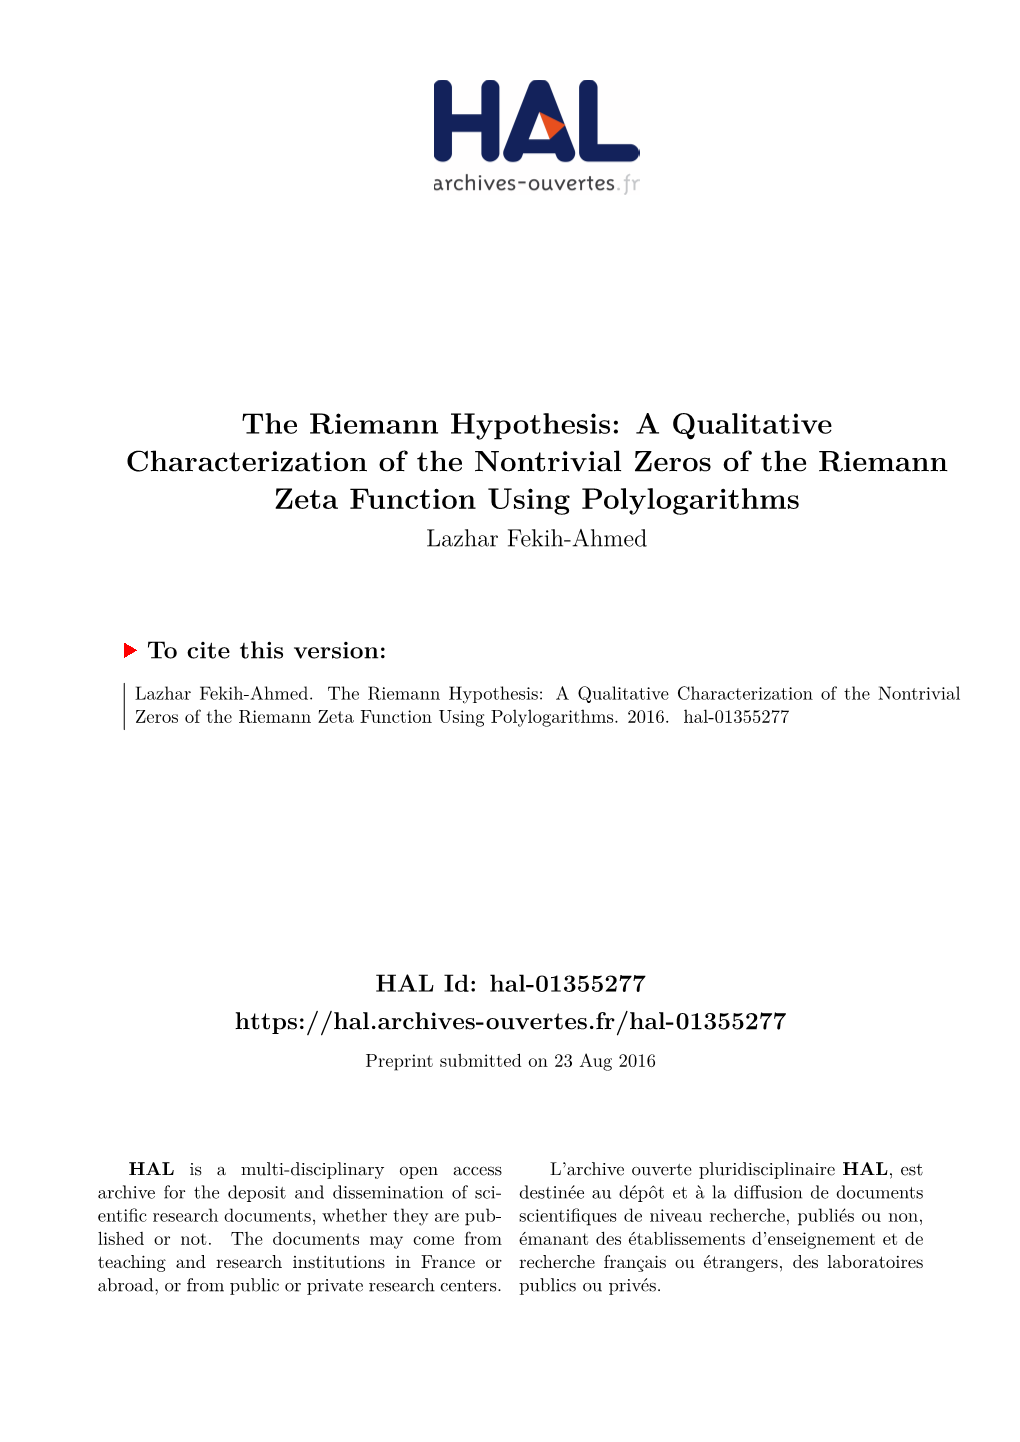 The Riemann Hypothesis: a Qualitative Characterization of the Nontrivial Zeros of the Riemann Zeta Function Using Polylogarithms Lazhar Fekih-Ahmed